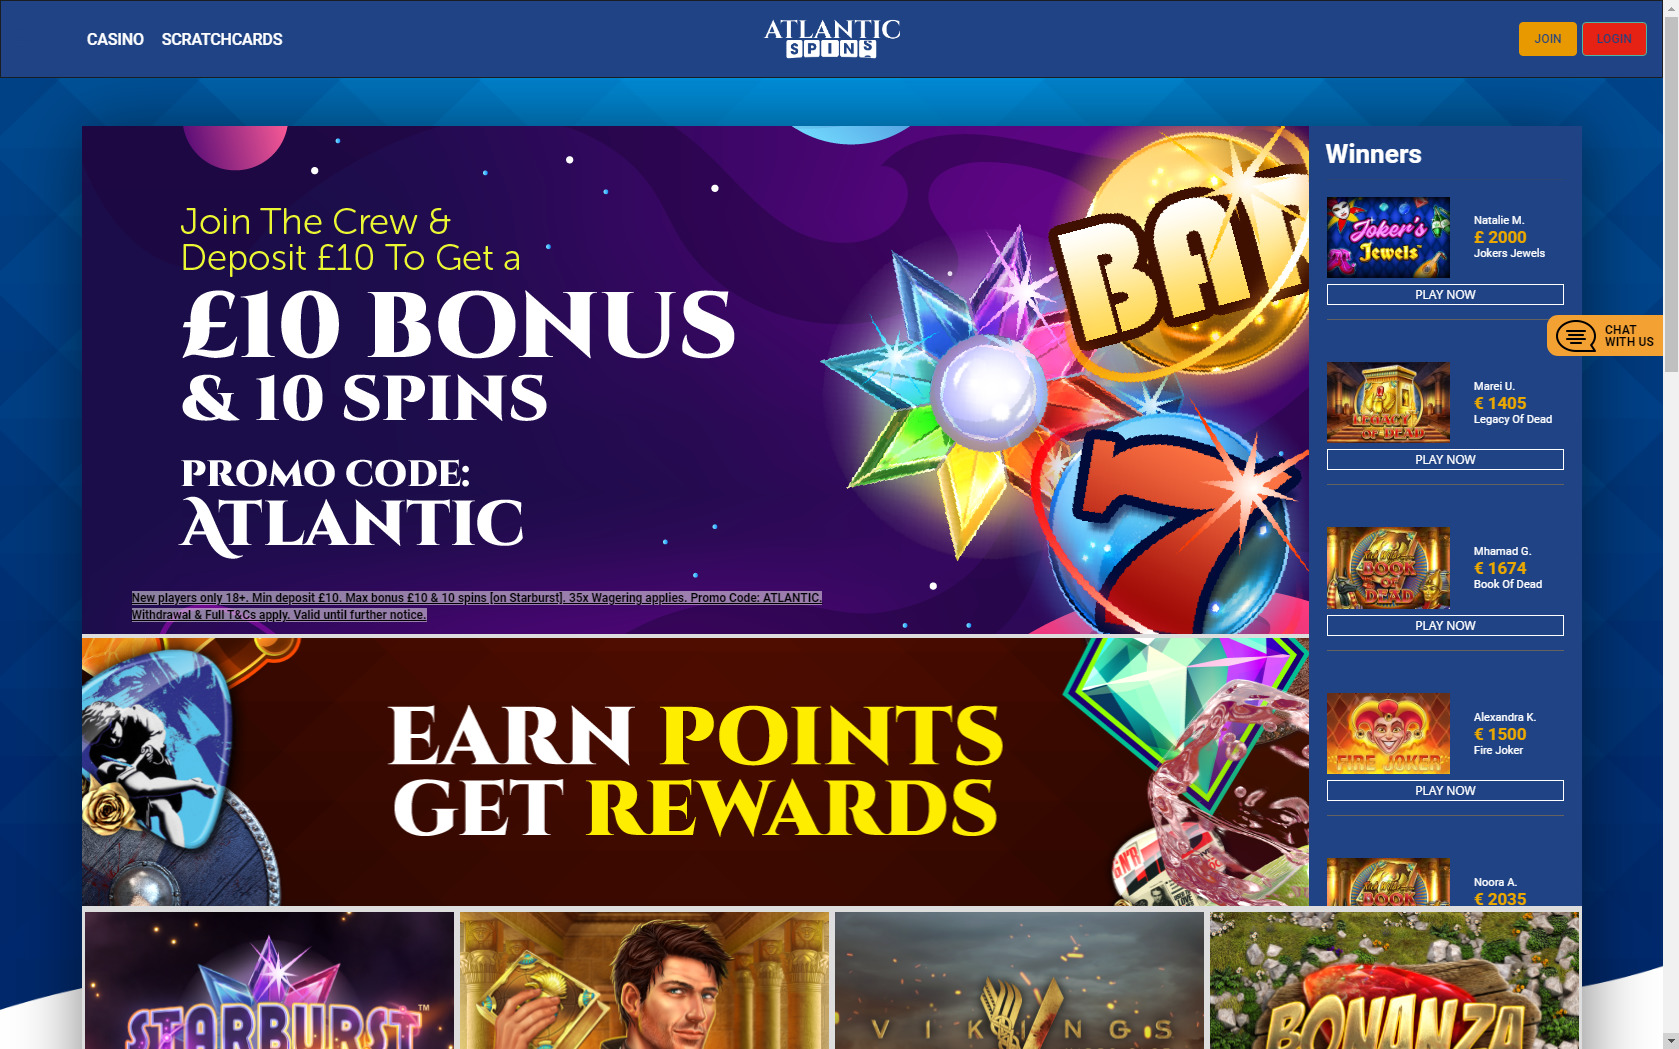 Atlantic Spins Casino Review